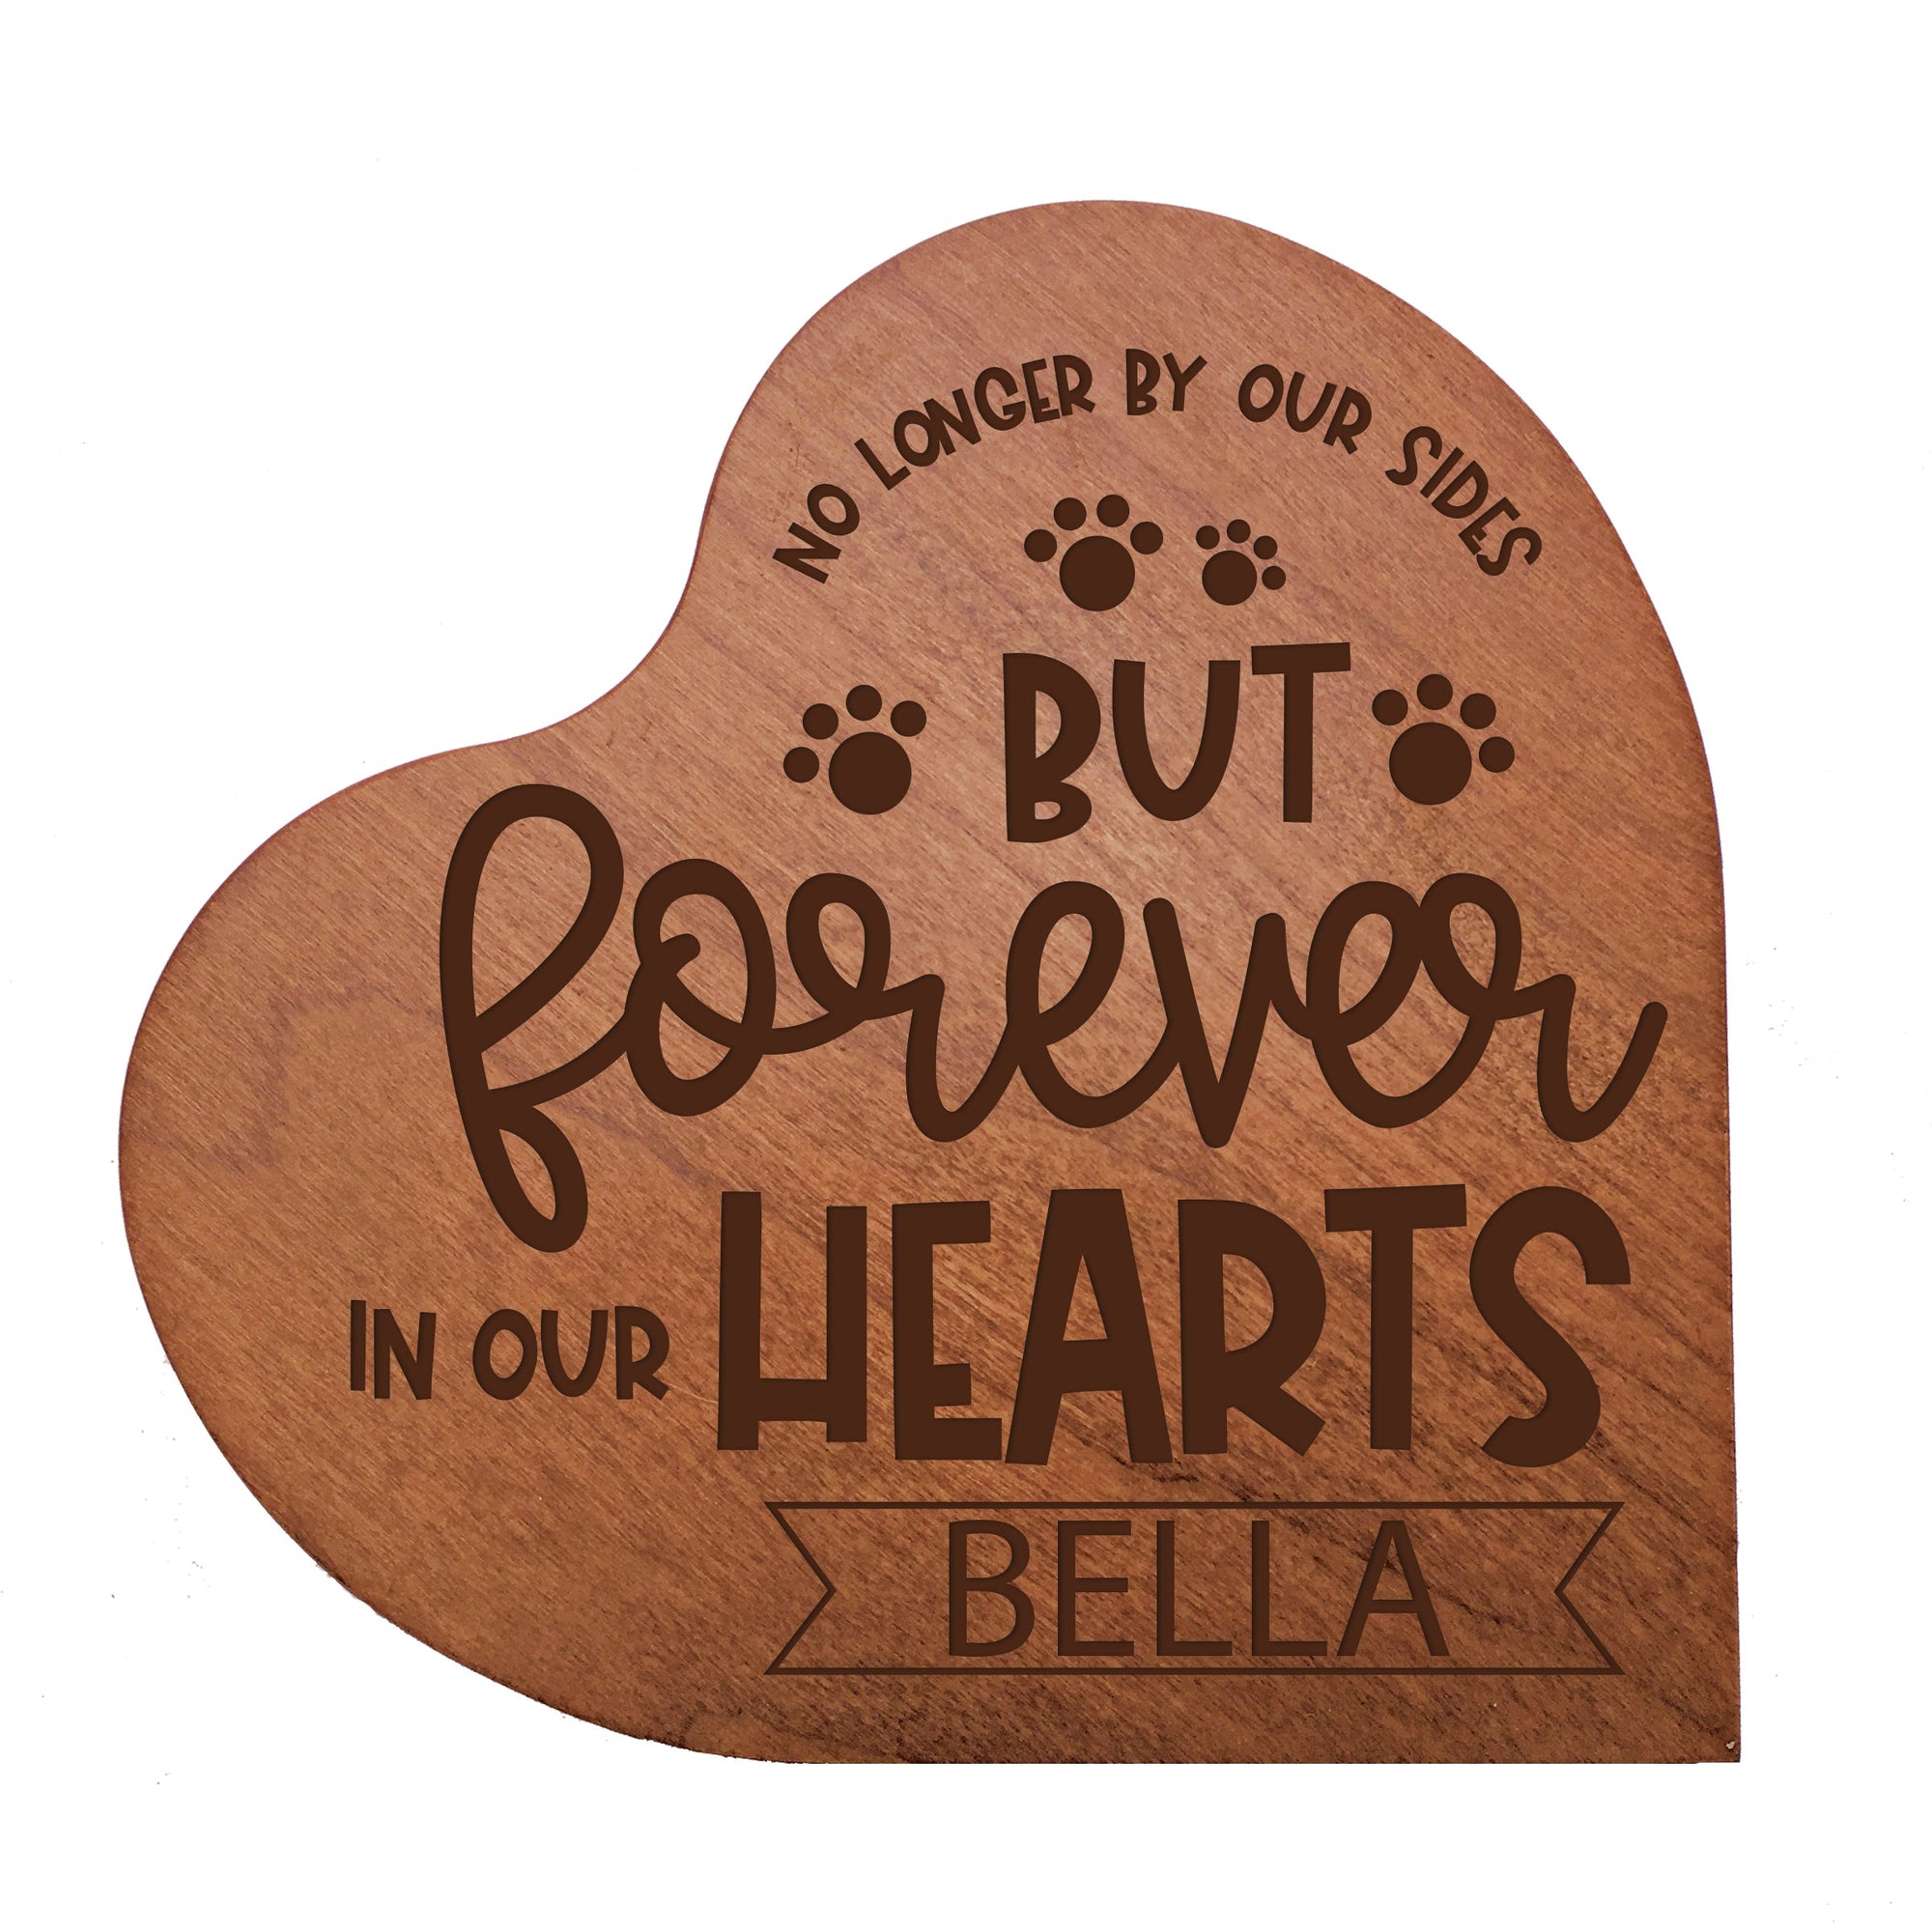 Cherry Pet Memorial Heart Block Decor with phrase "No Longer By Our Sides"